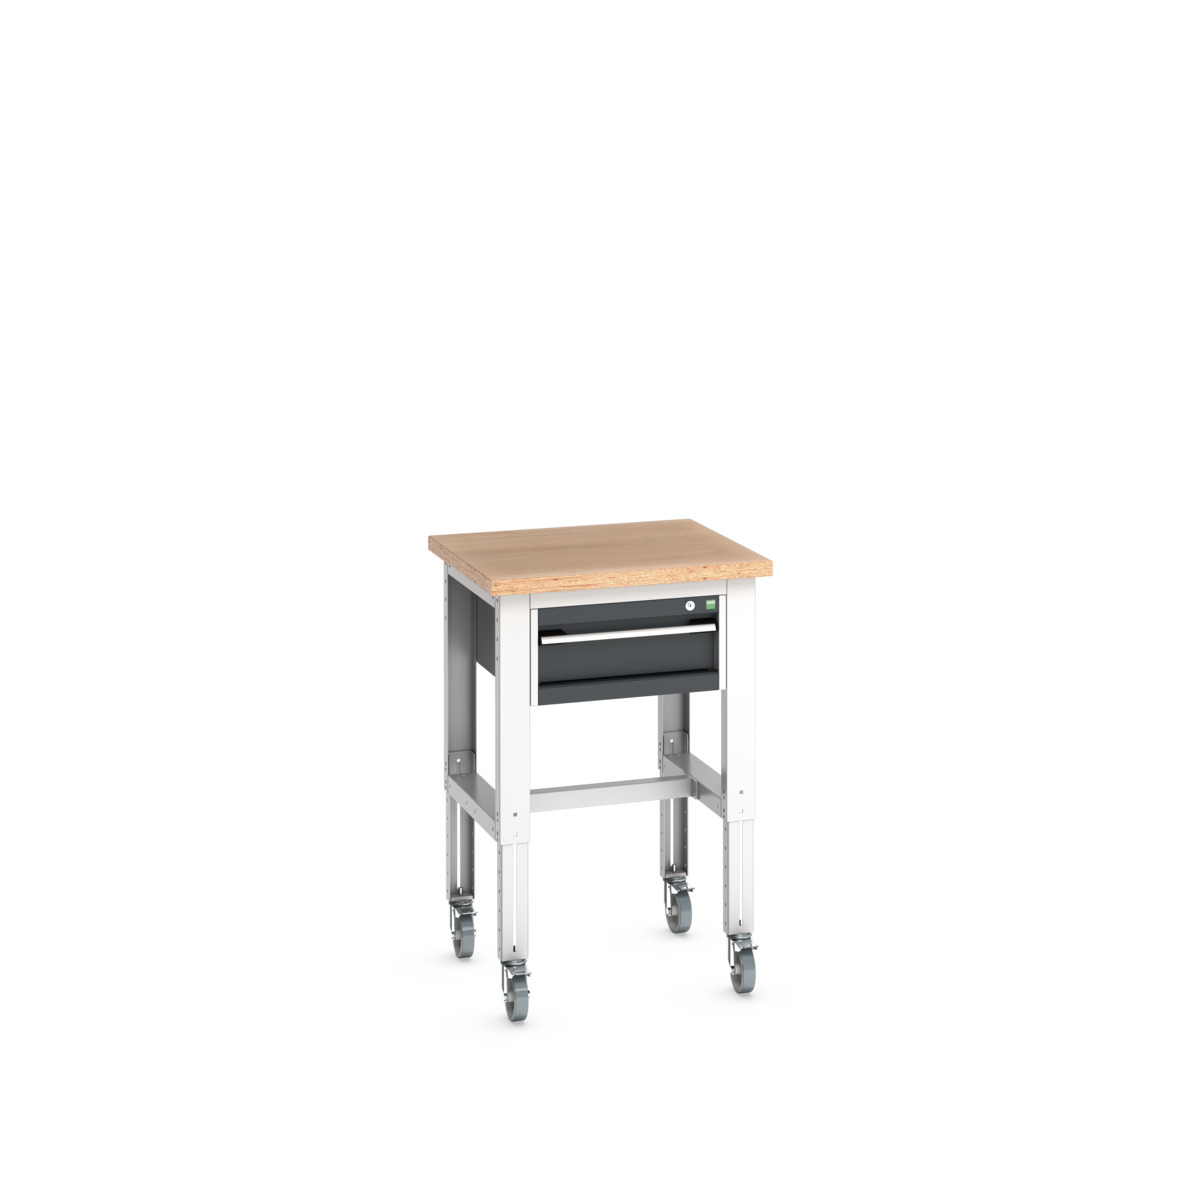 41003271.19V - cubio mobile bench adj height (mpx)